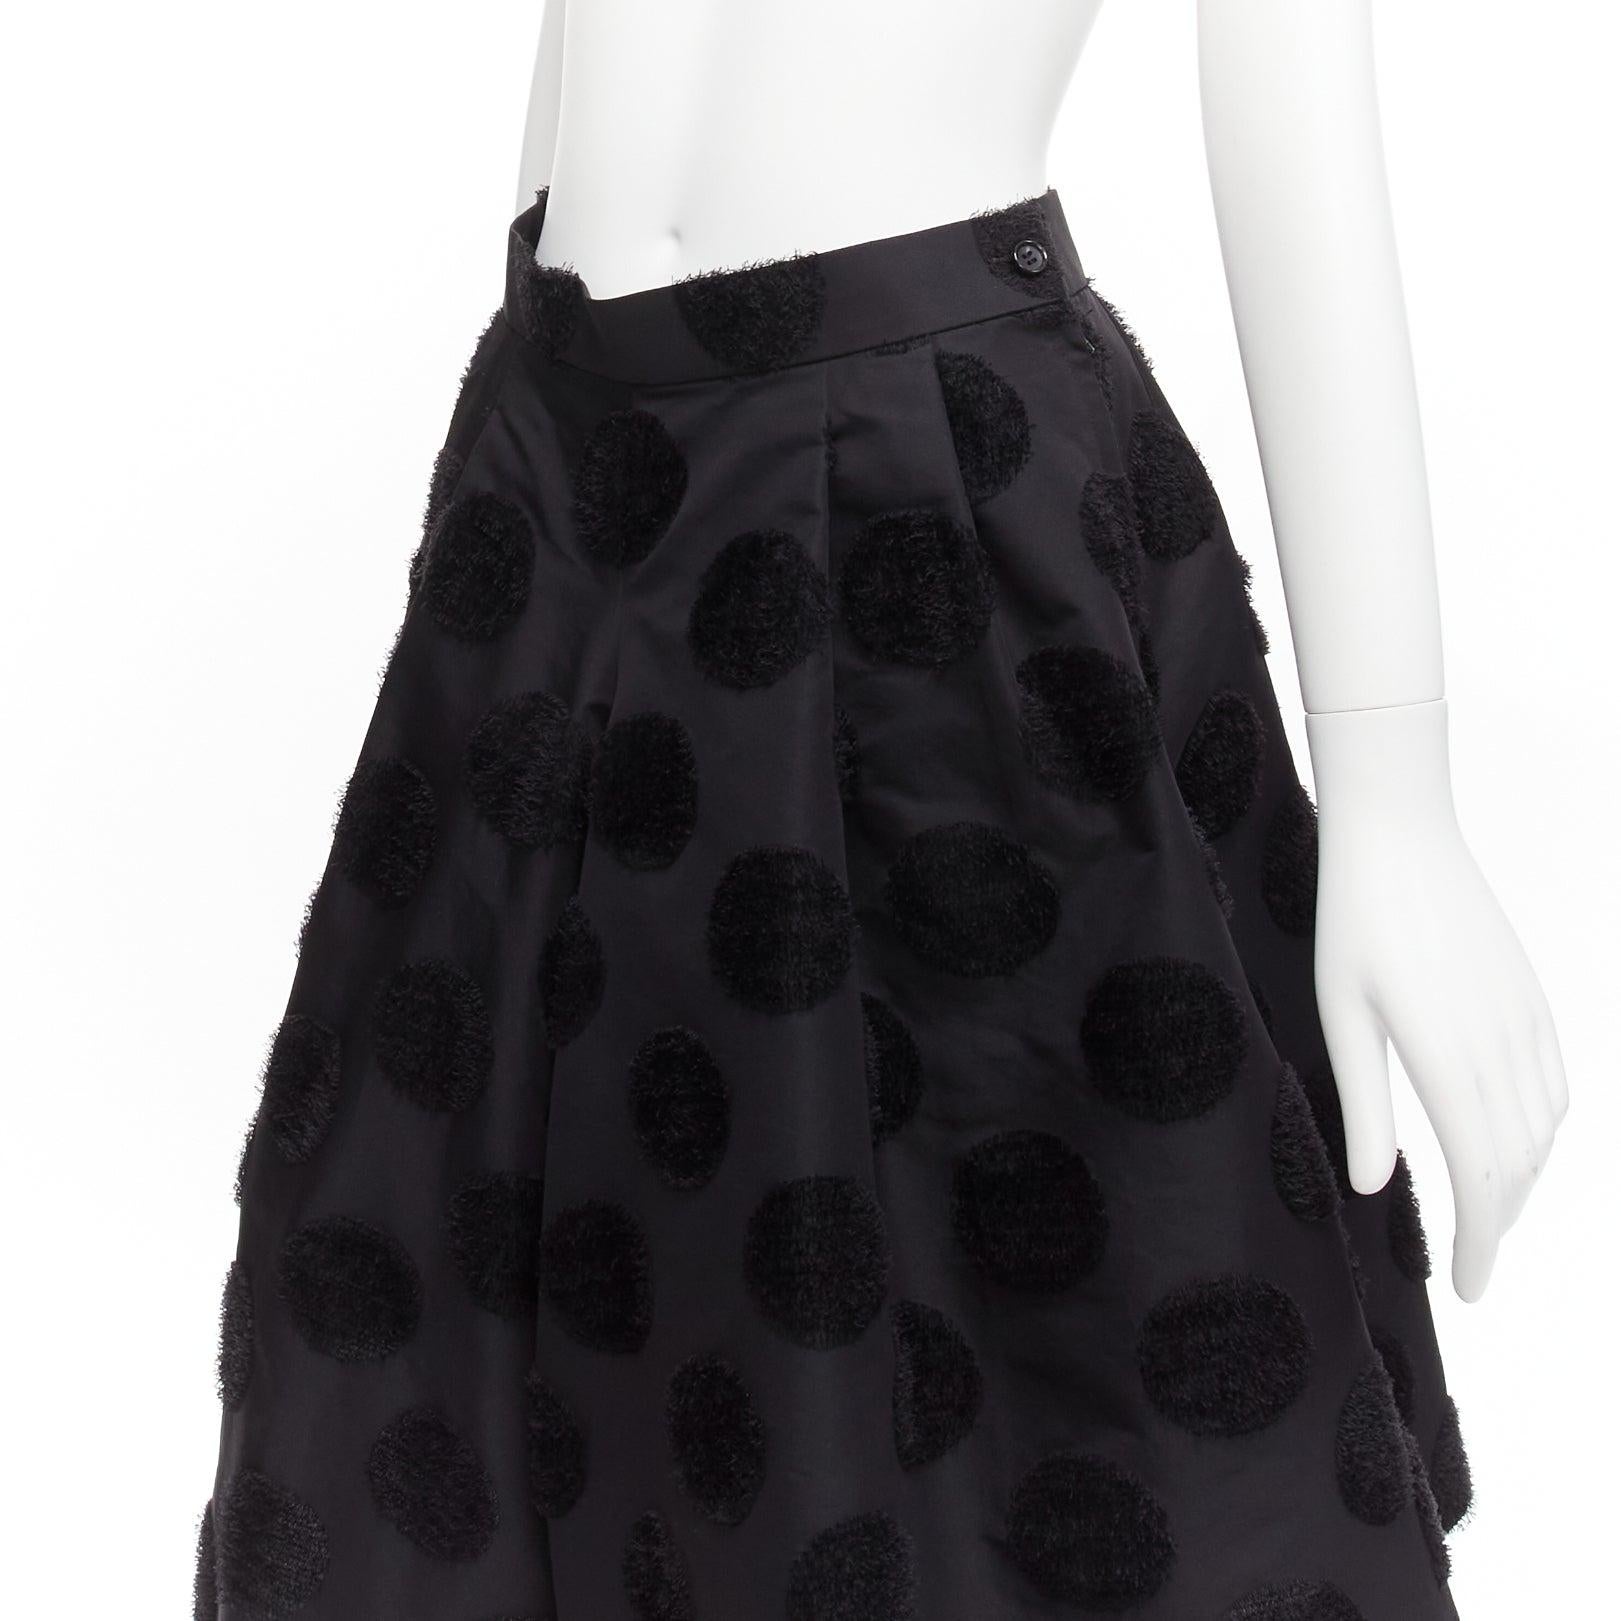 COMME DES GARCONS black polka dot pleat dart wide culotte pants S
Reference: NKLL/A00072
Brand: Comme Des Garcons
Material: Fabric
Color: Black
Pattern: Polka Dot
Closure: Zip Fly
Lining: Black Fabric
Extra Details: Culottes that looks like a skirt